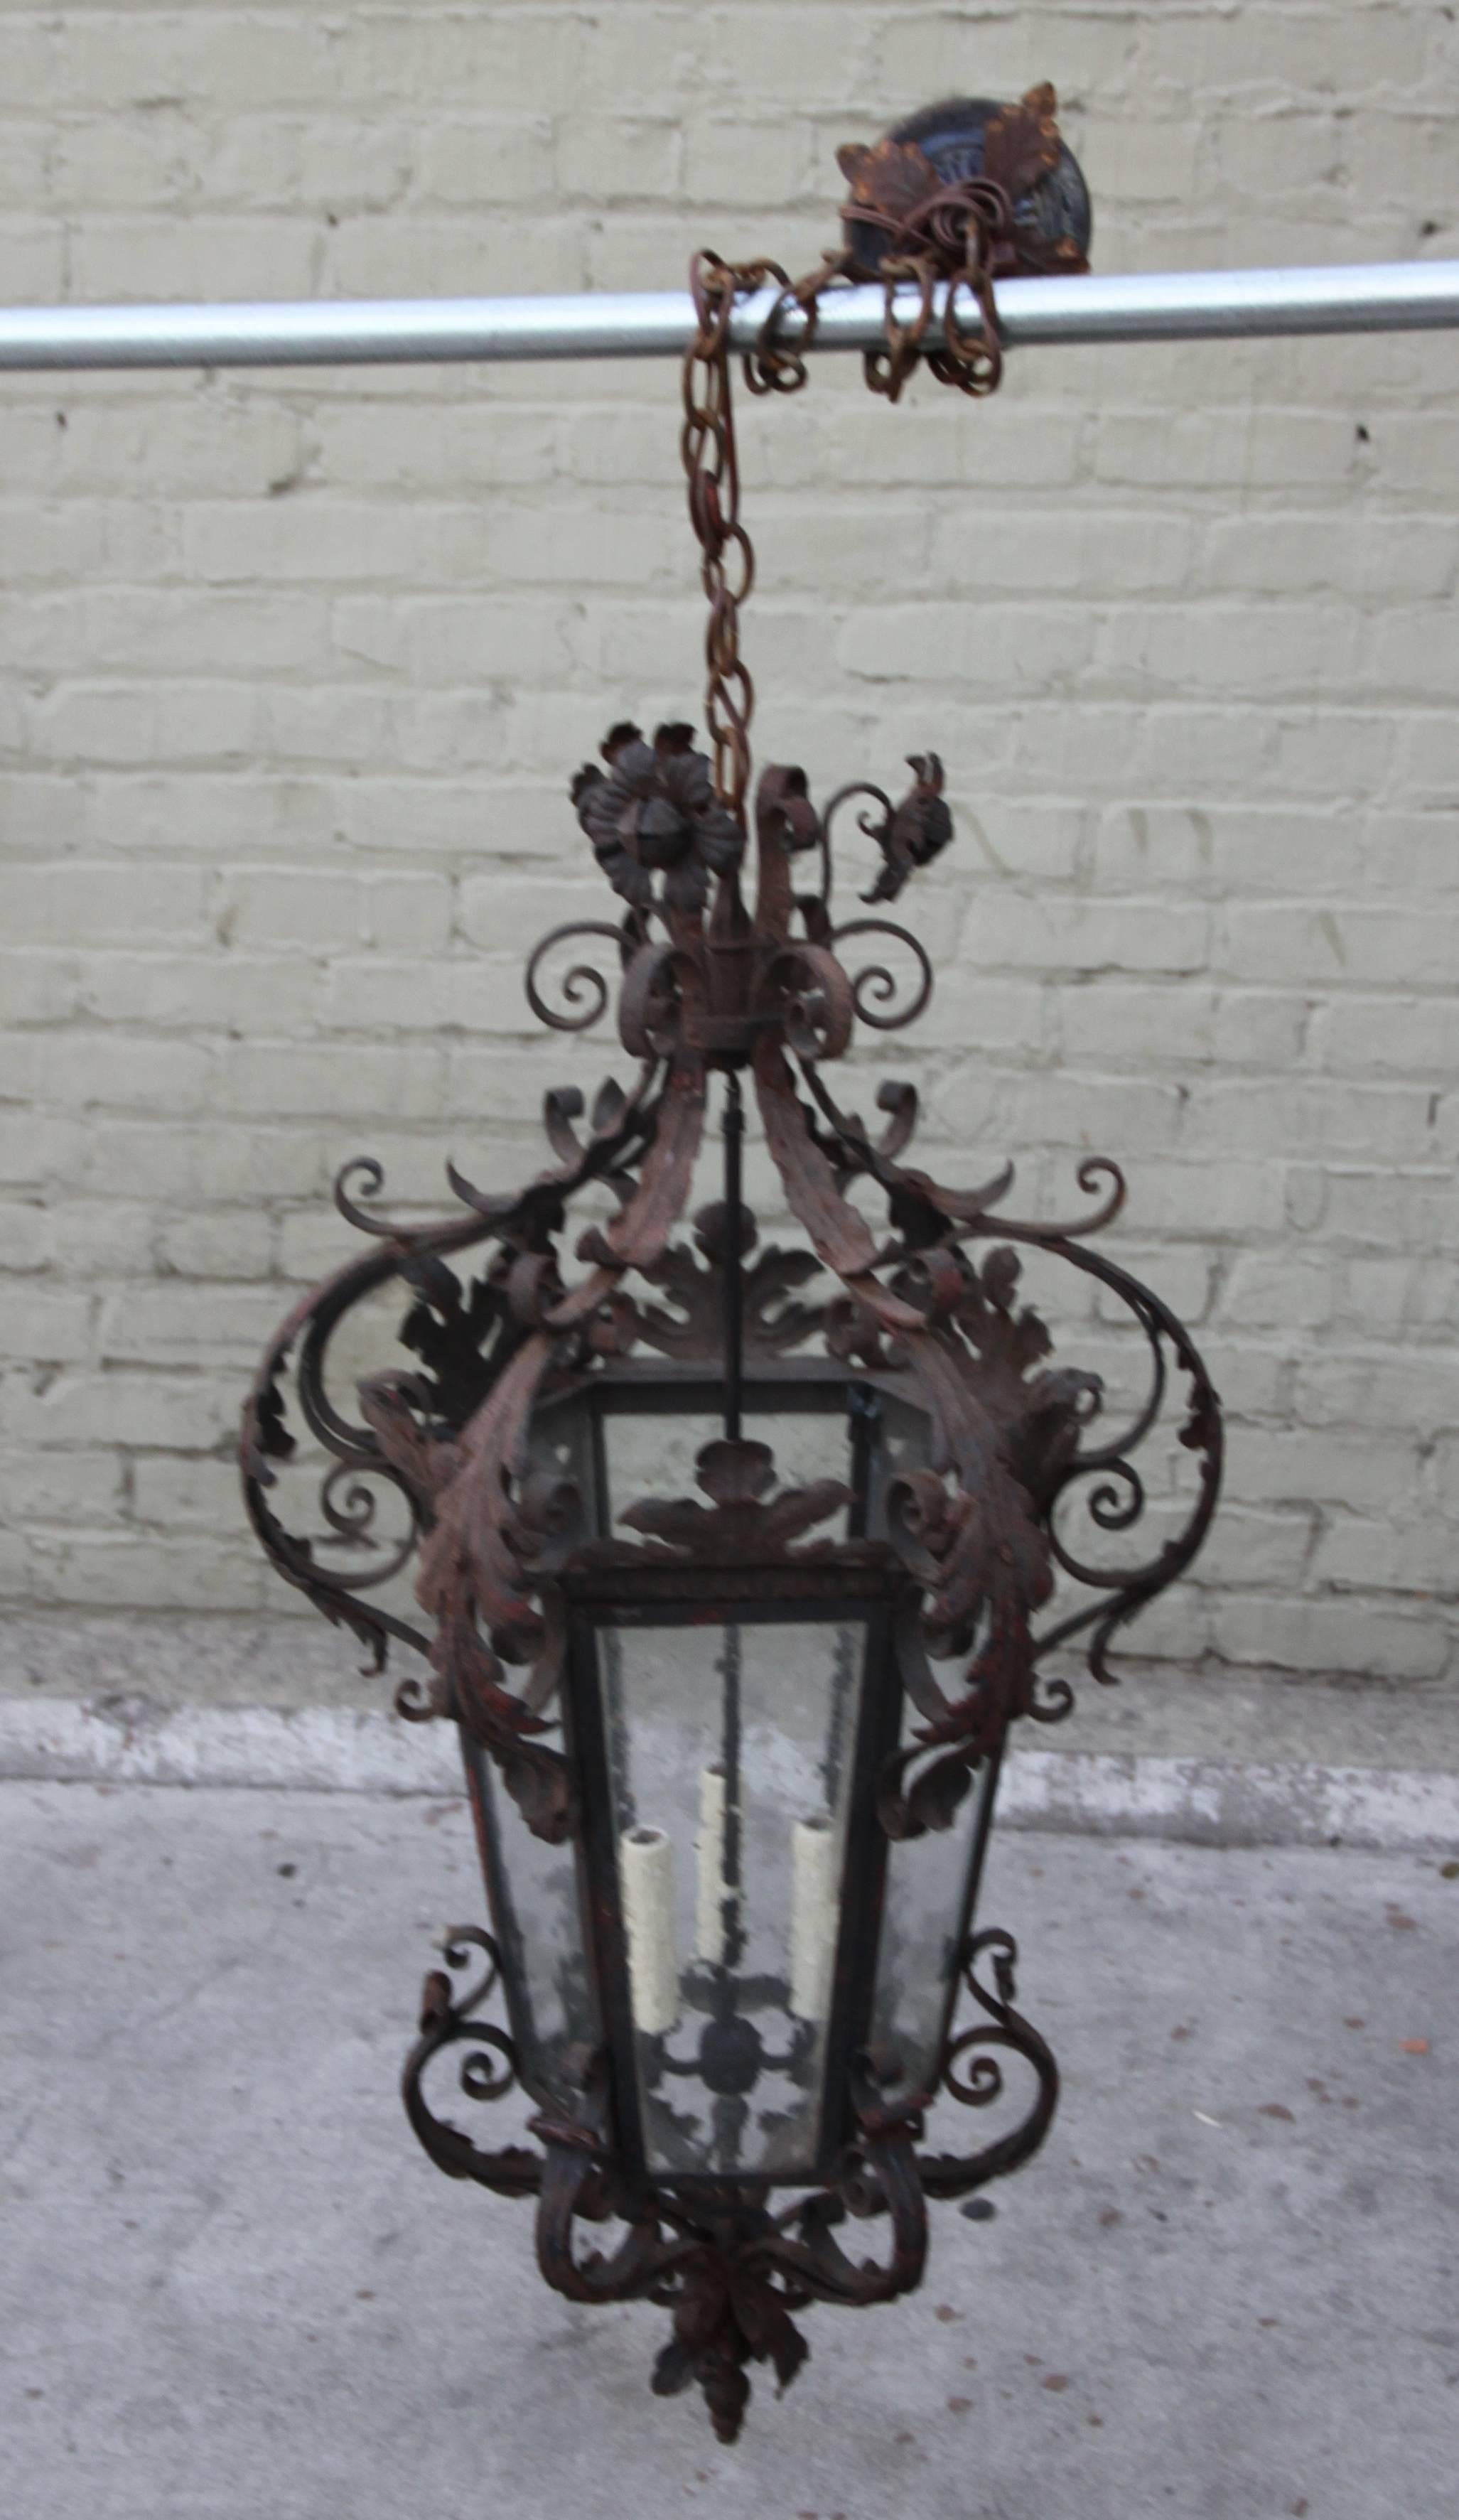 Spanish hand-wrought iron lantern with scrolled acanthus leaf details and flowers throughout. Newly wired with three lights. Includes chain and canopy.